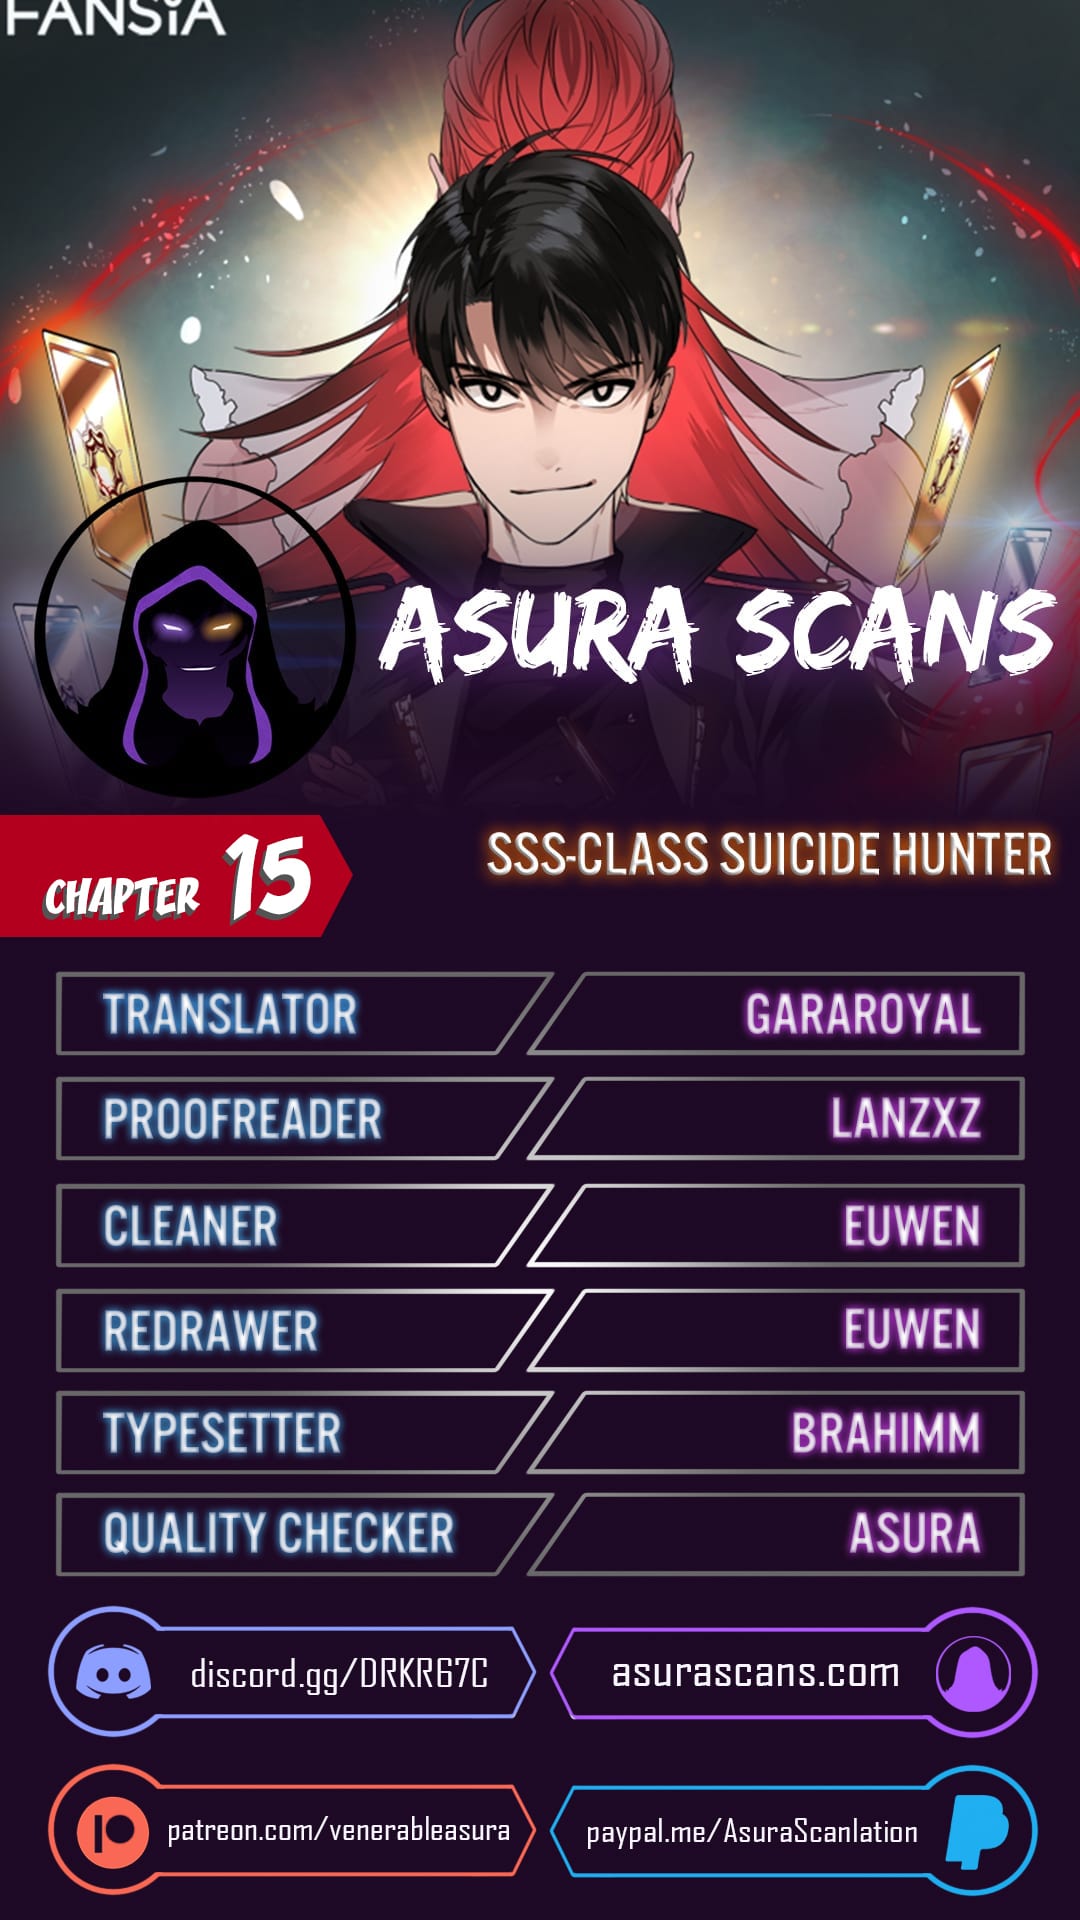 SSS-Class Suicide Hunter chapter 15